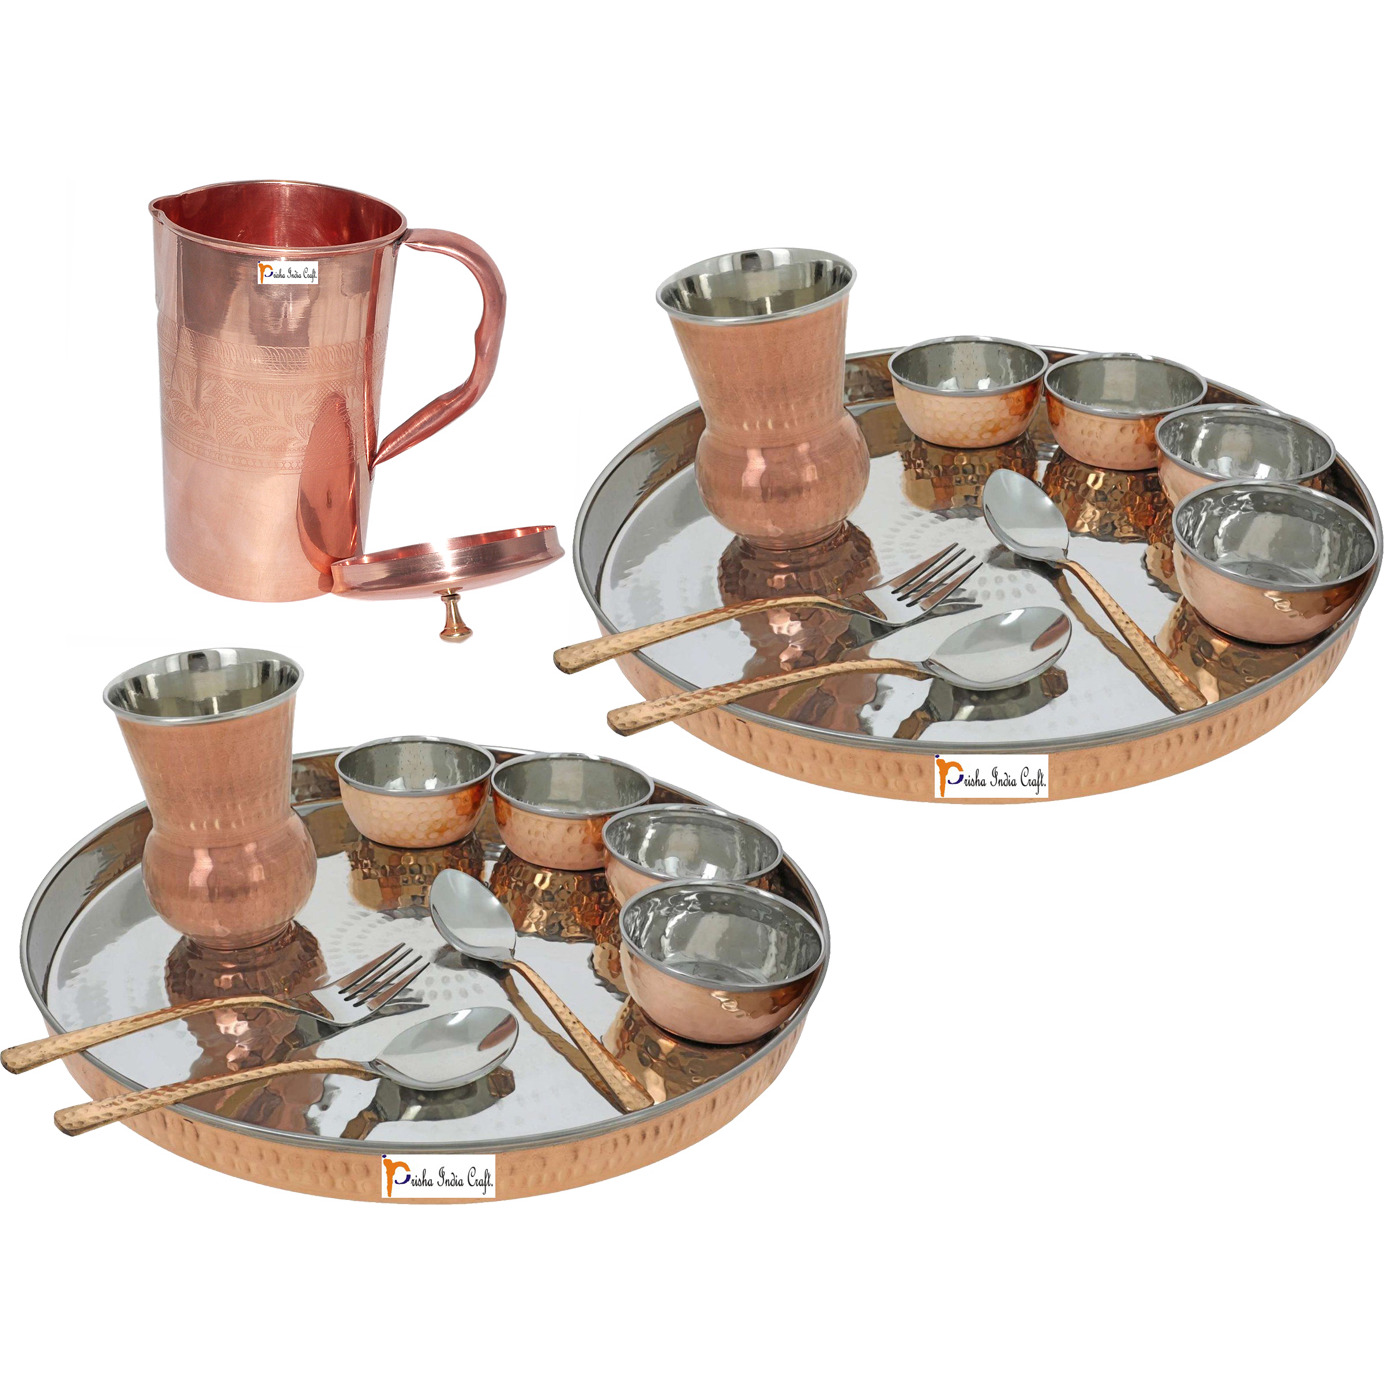 Prisha India Craft B. Set of 2 Dinnerware Traditional Stainless Steel Copper Dinner Set of Thali Plate, Bowls, Glass and Spoons, Dia 13  With 1 Pure Copper Embossed Pitcher Jug - Christmas Gift